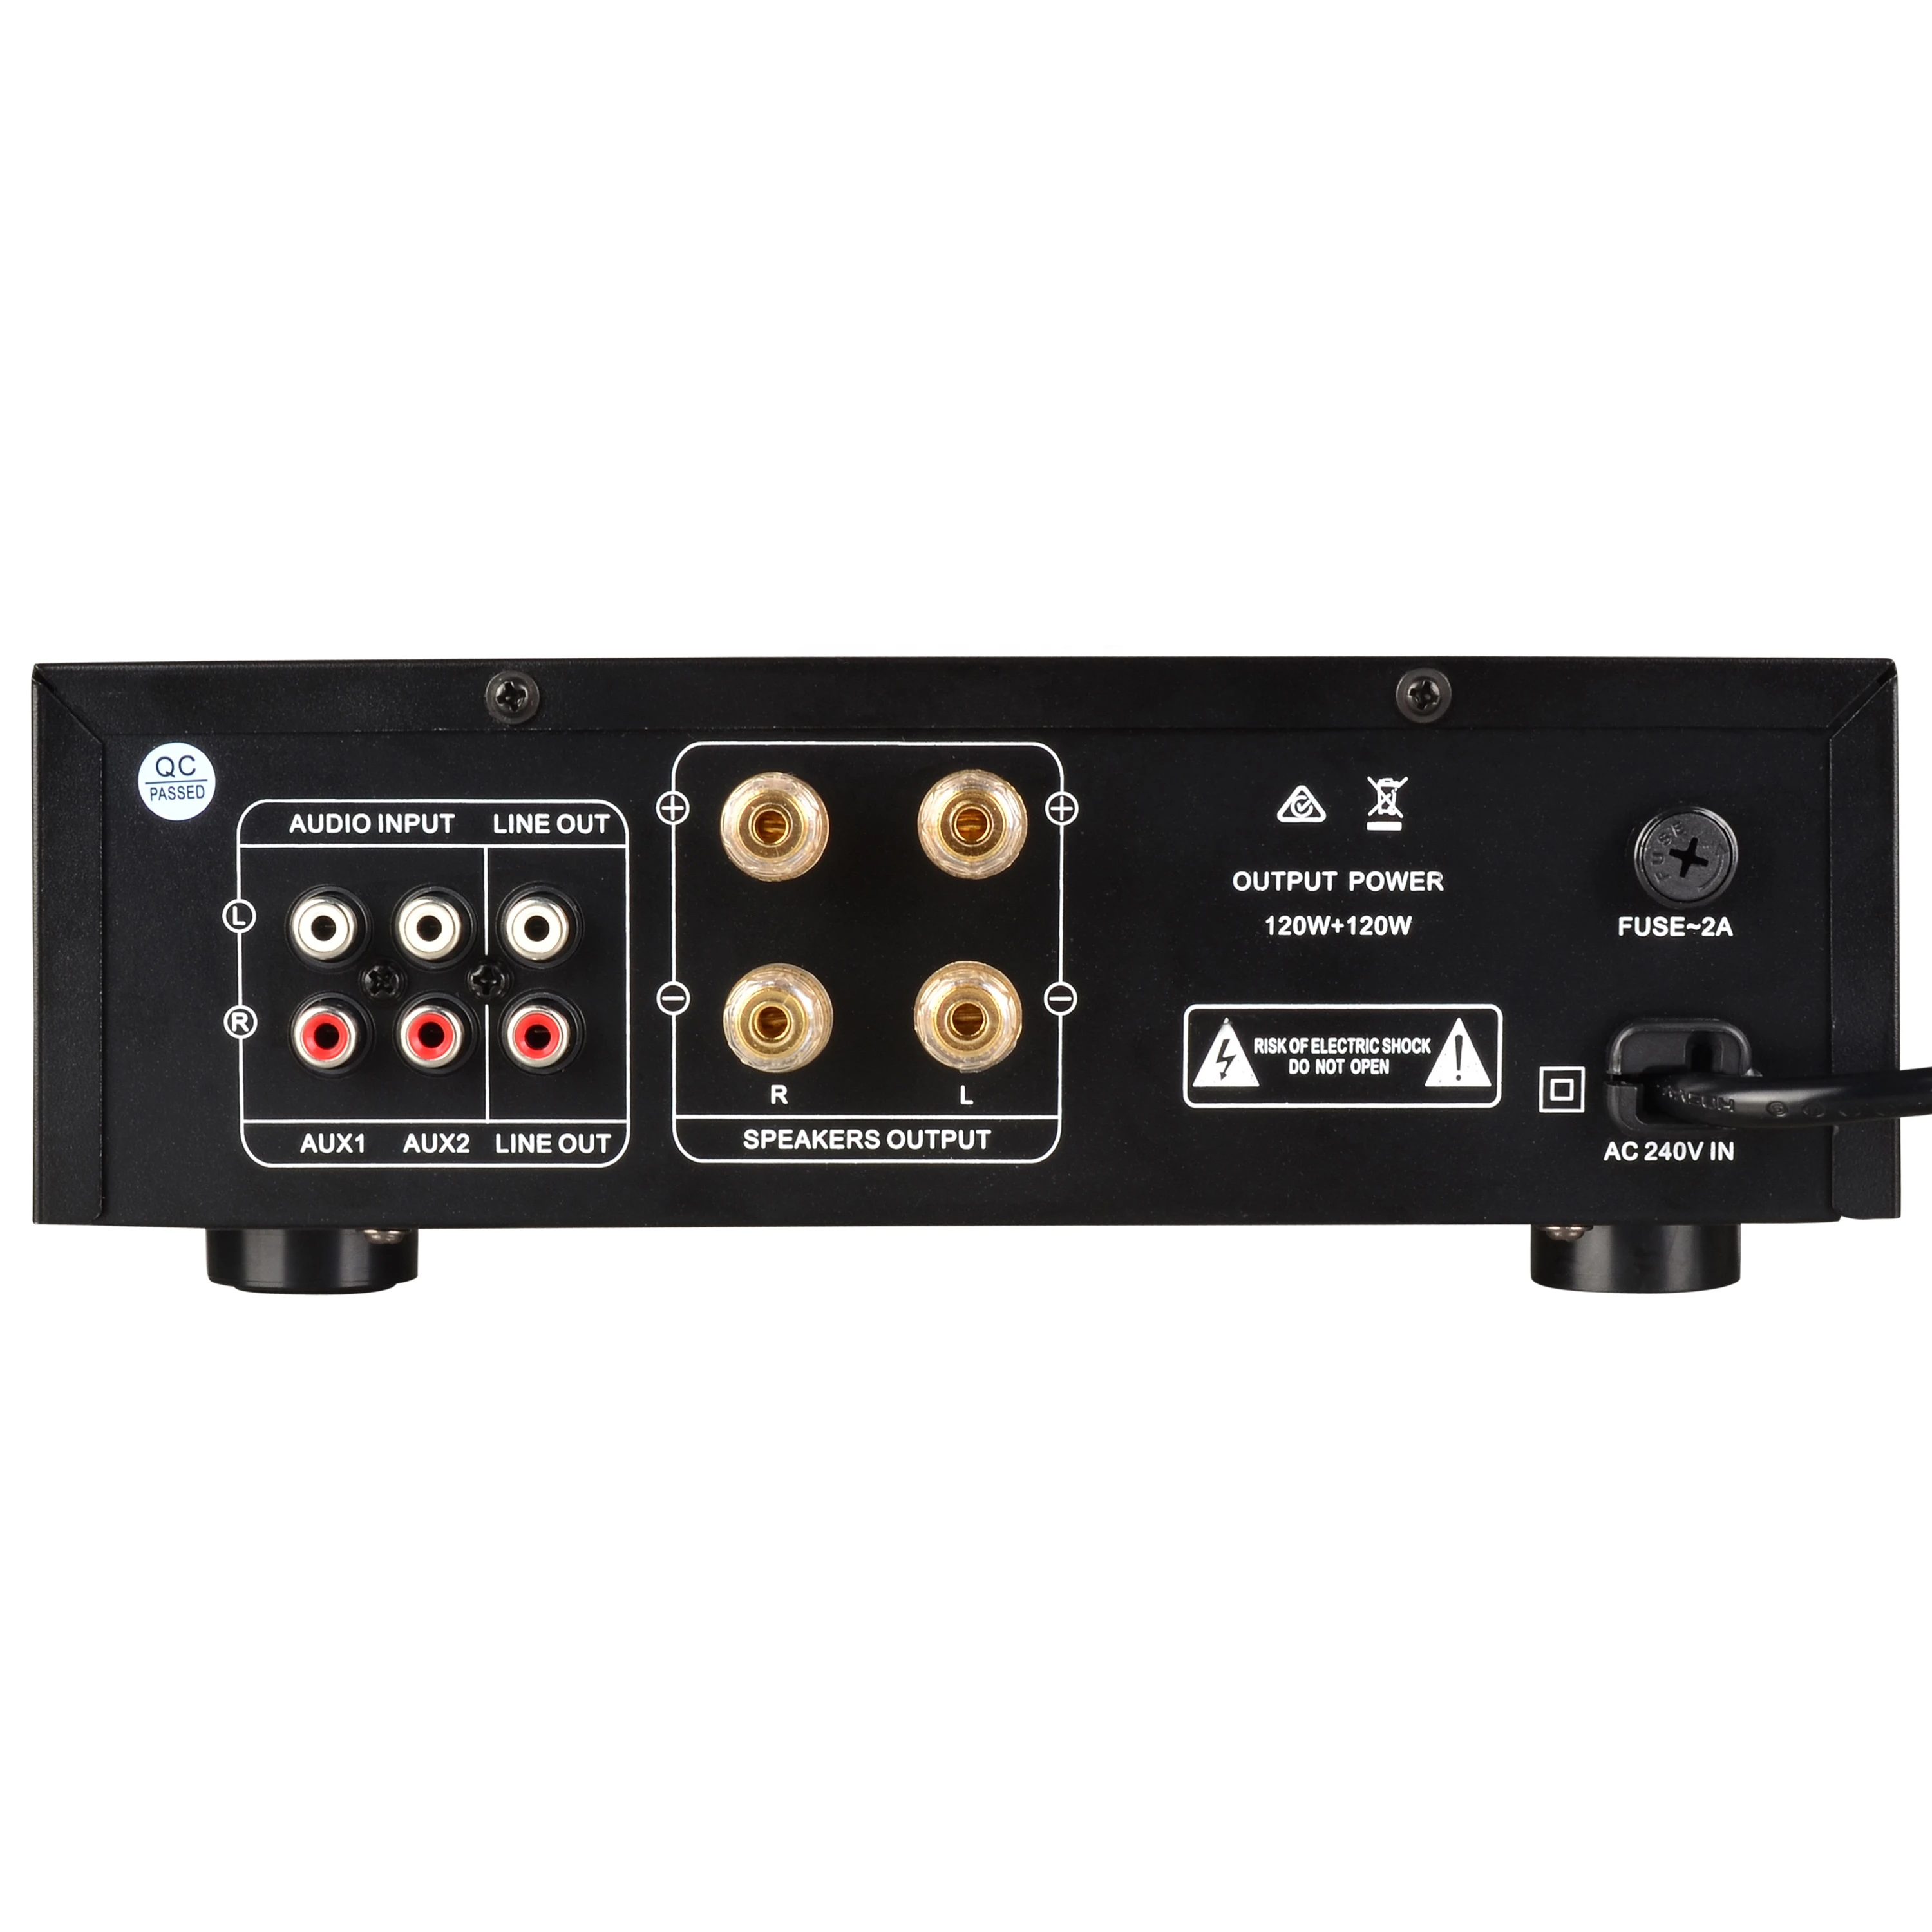 HIFI Audio Amplifier with Remote 2.0 Home Stereo Amplifier